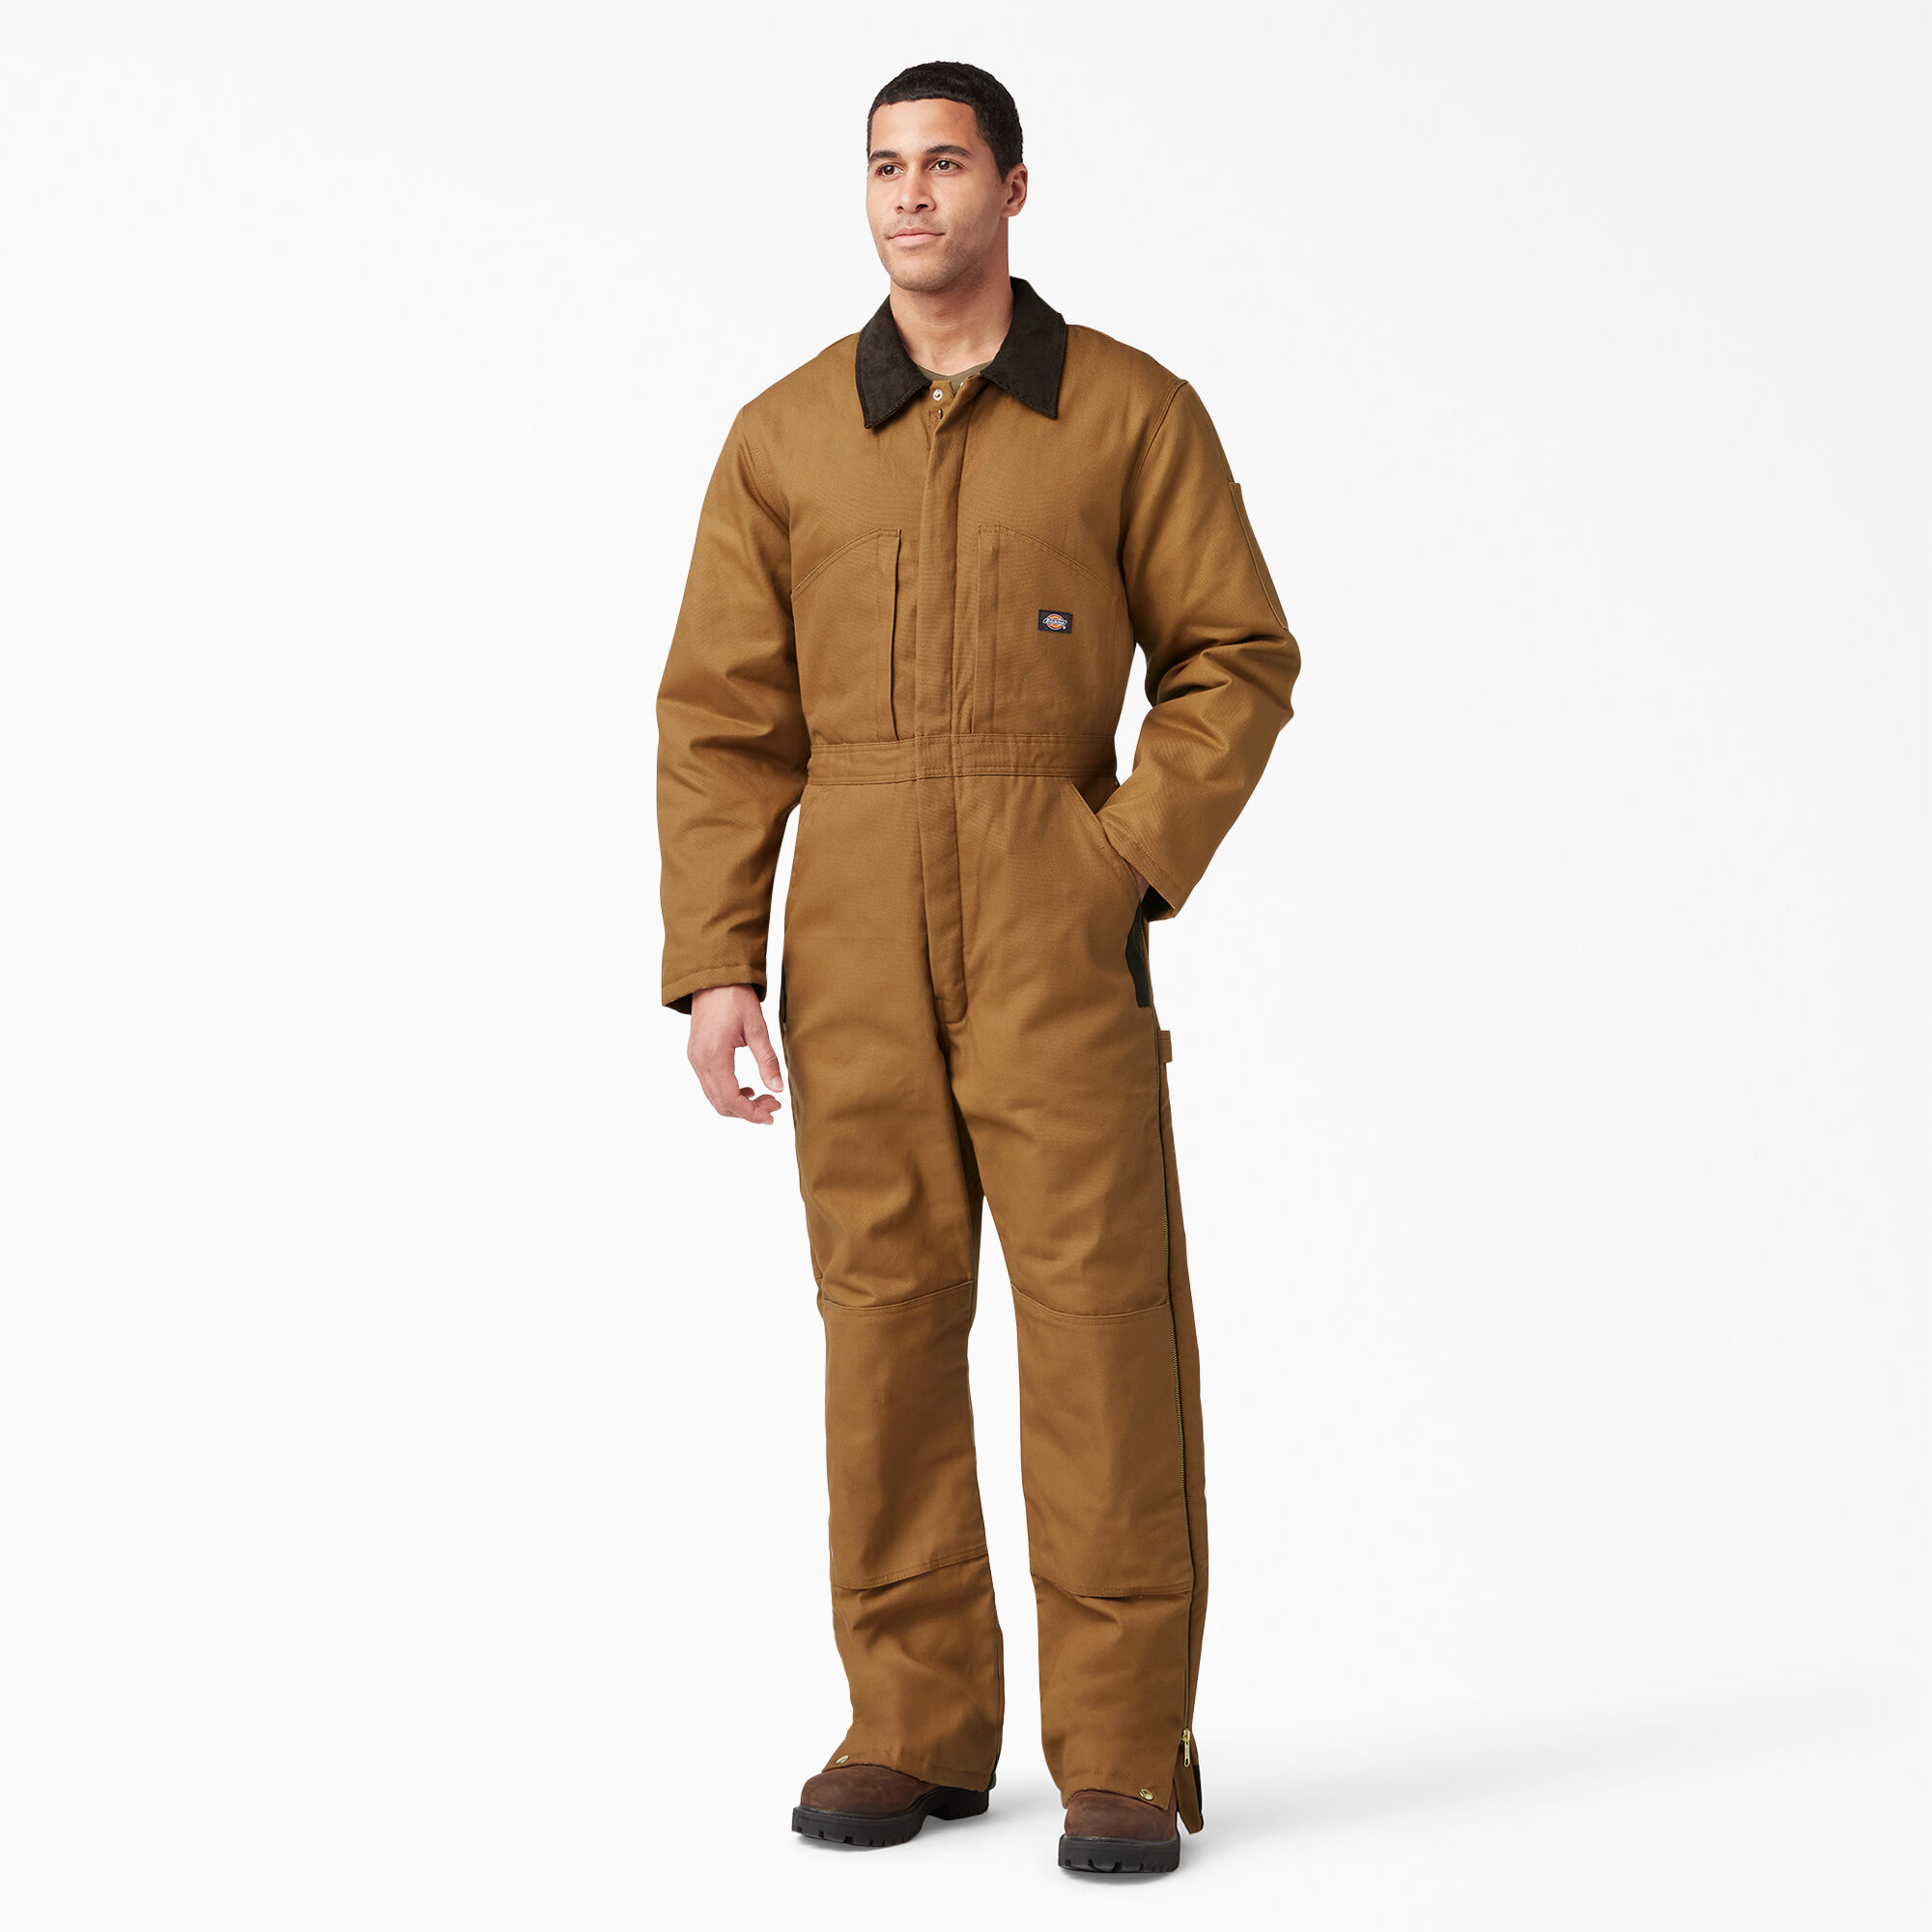 Dickie Coveralls Size Chart